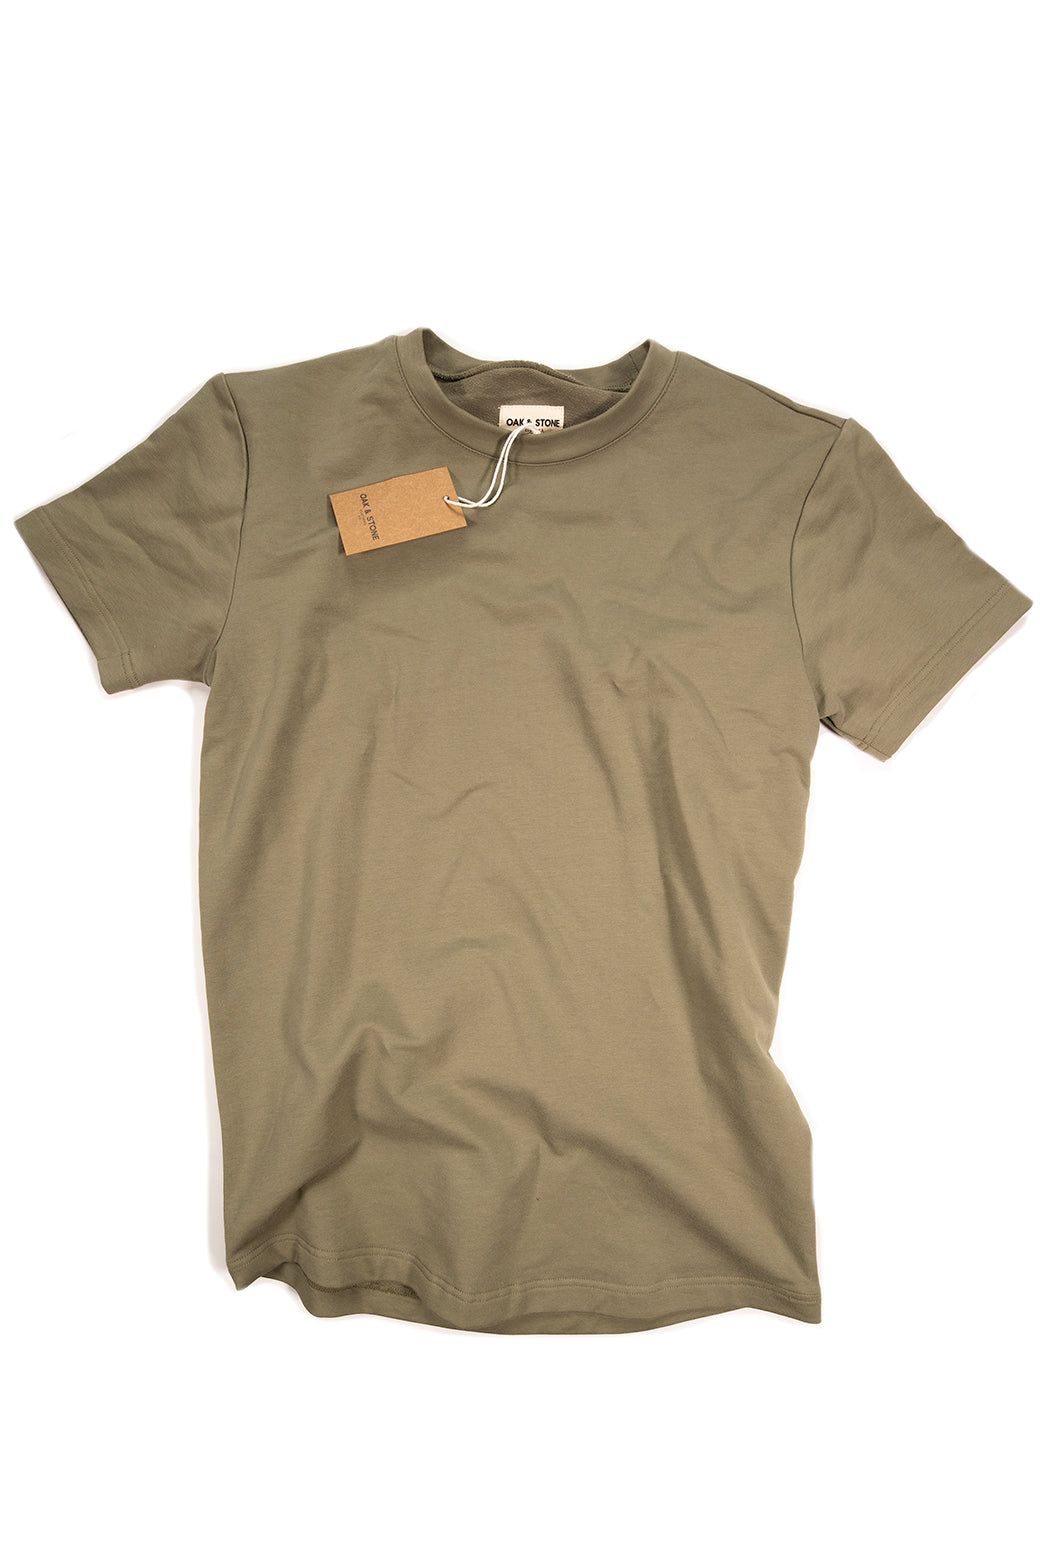 The Classic S/S Tee - Olive - Oak & Stone Clothing Co.